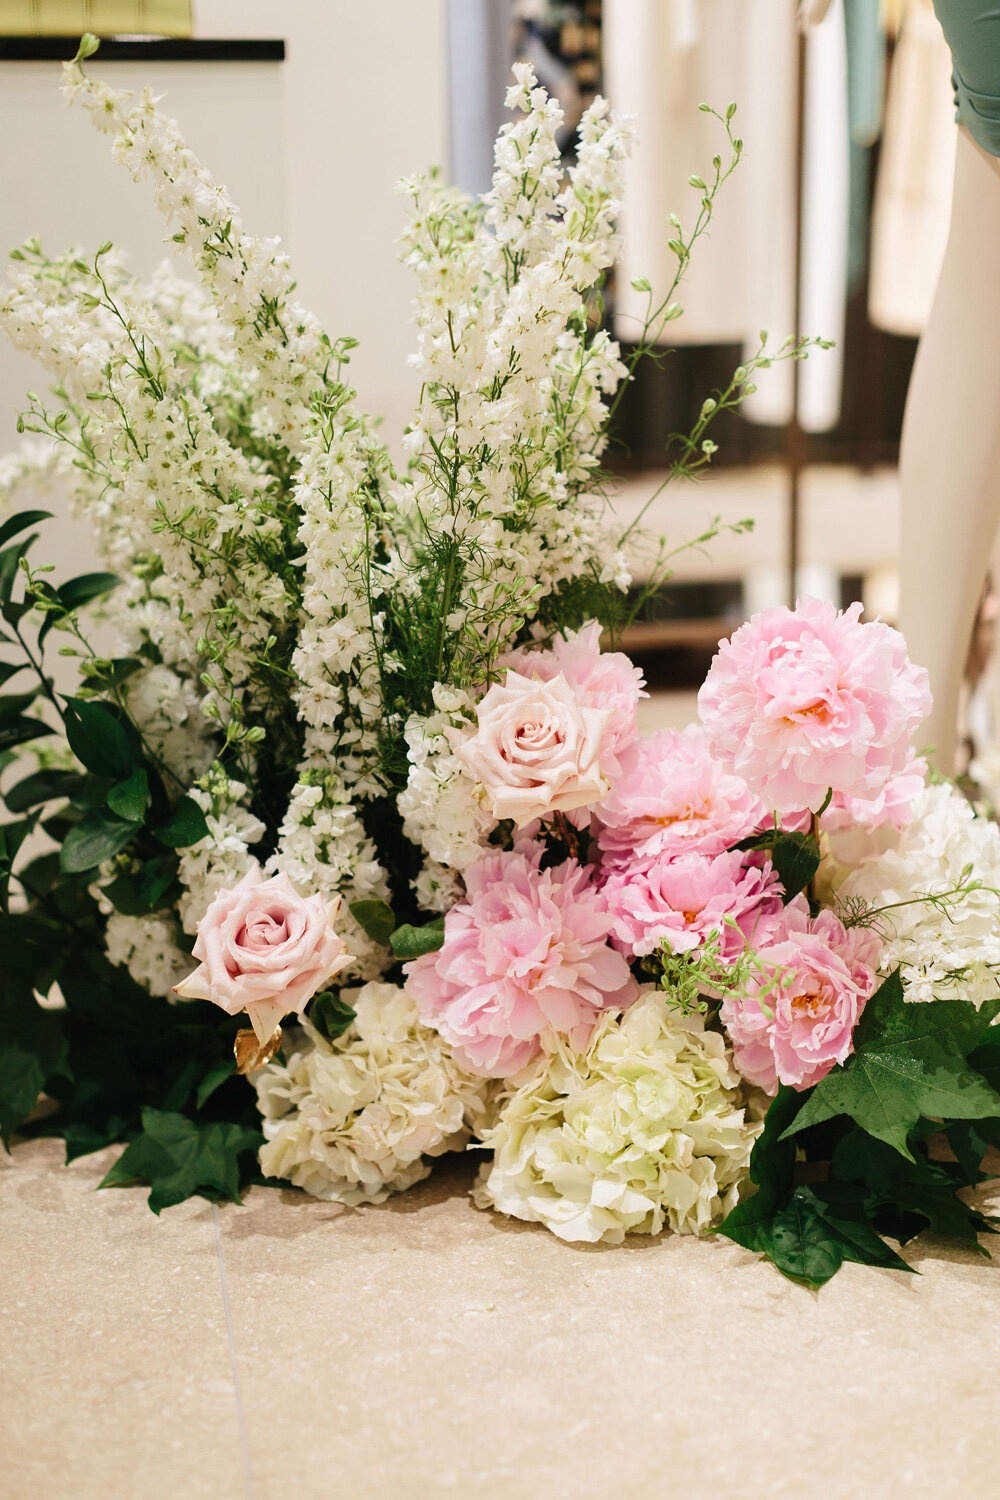 Exquisite floral detail created by Mikarla Bauer for The Wedding Series